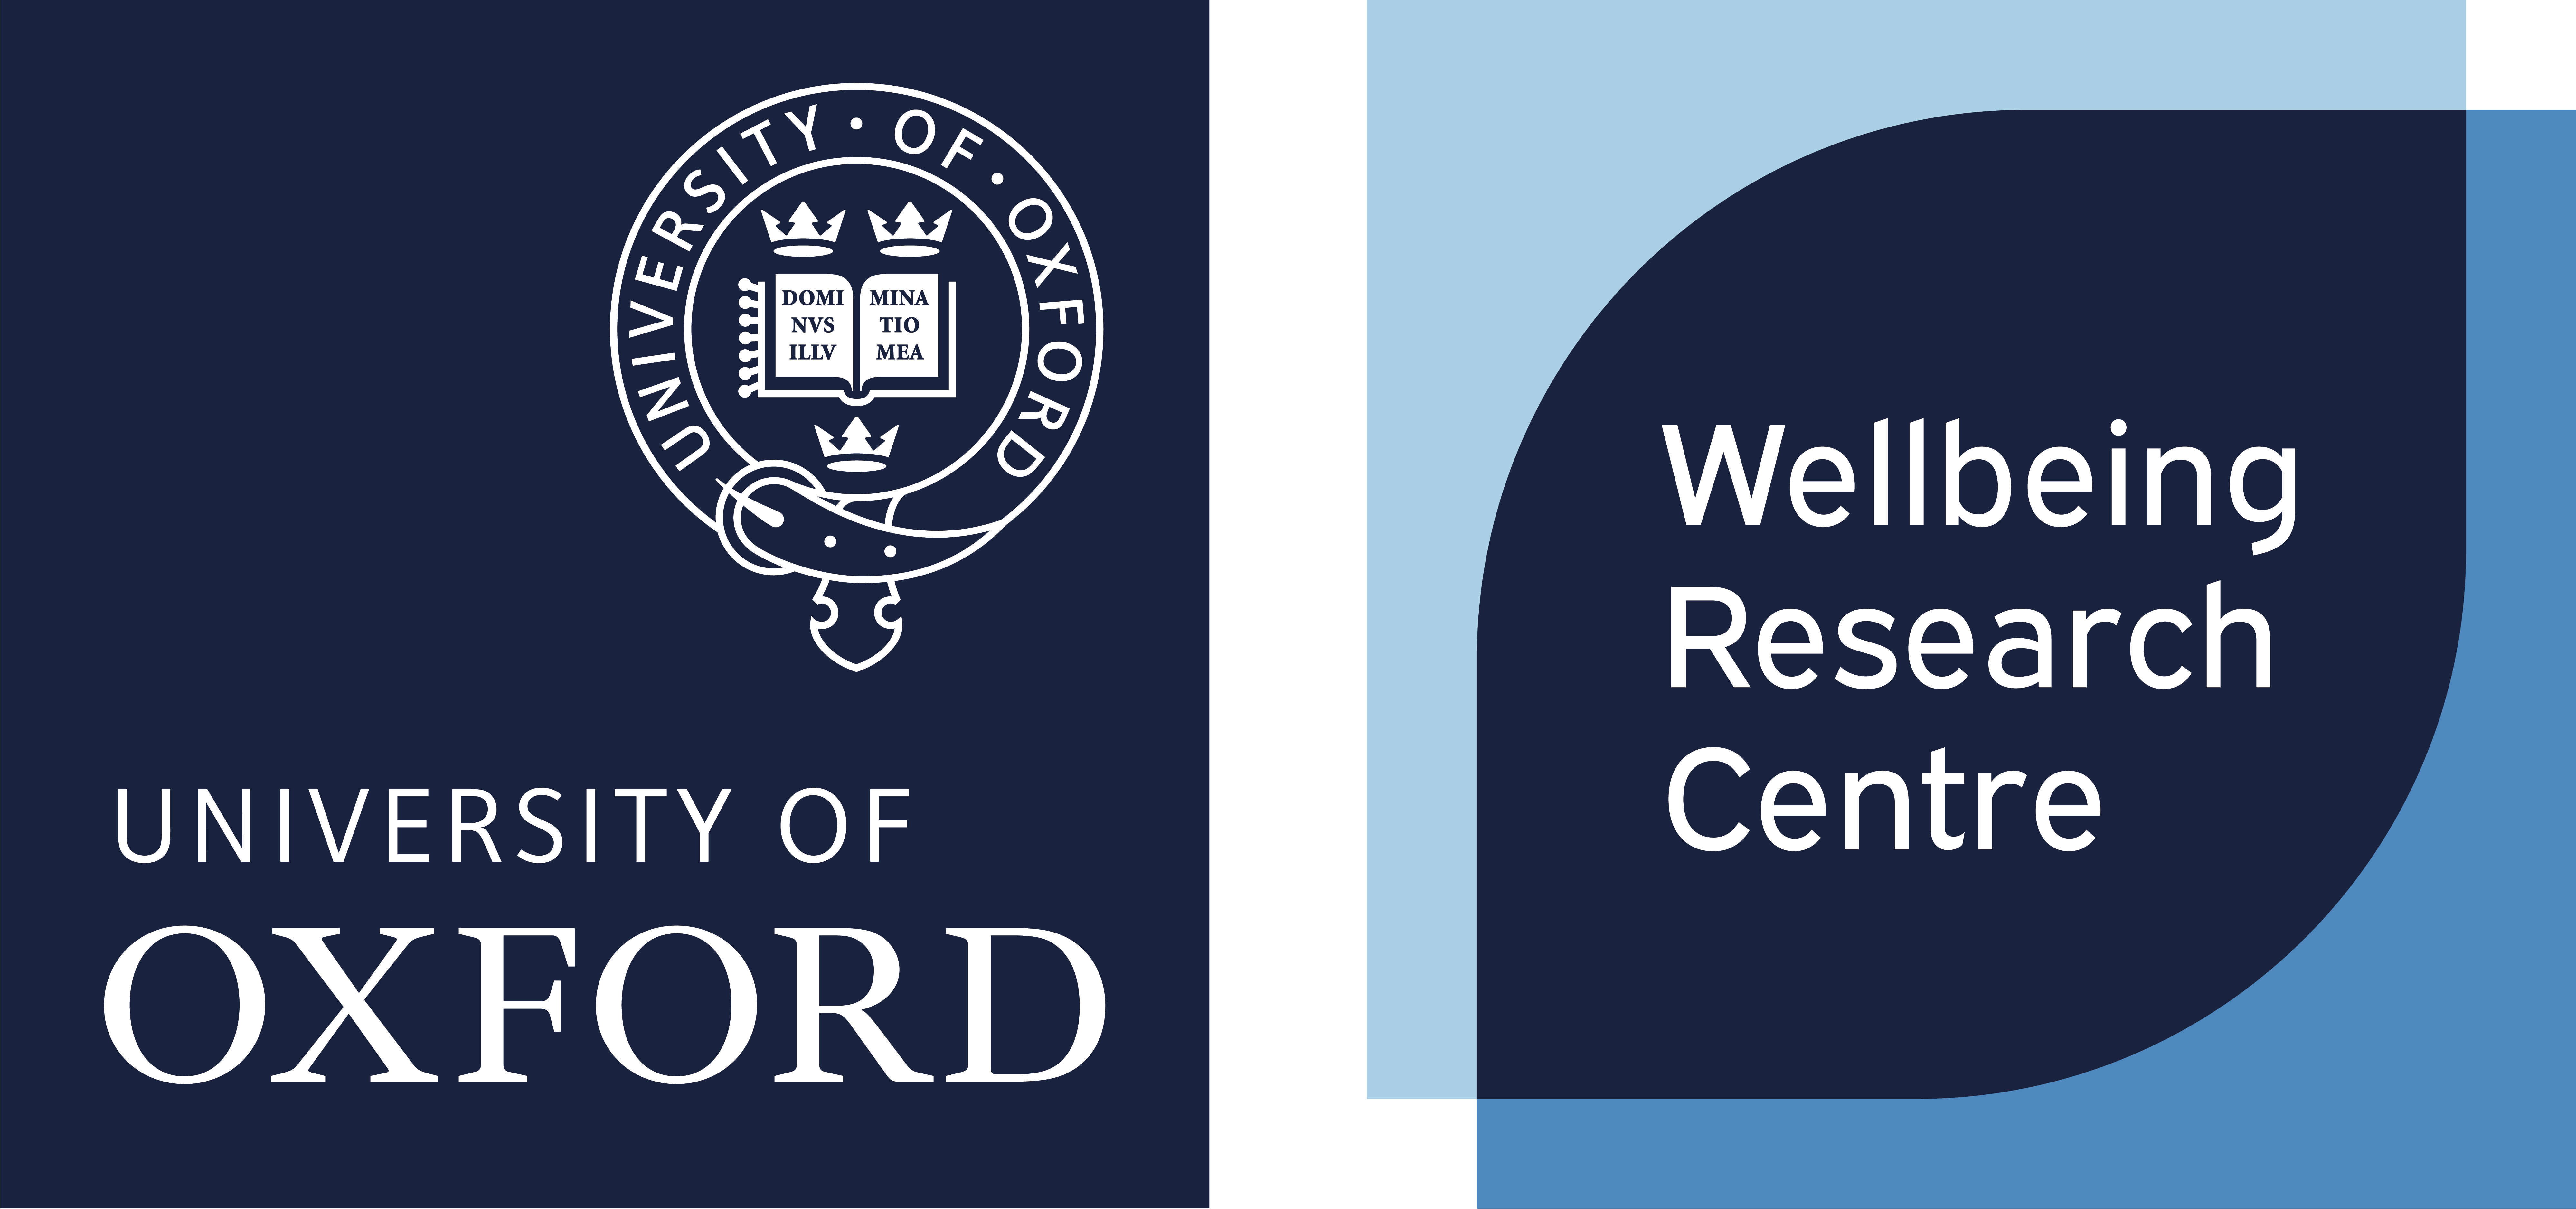 Wellbeing Research Centre Oxford logo